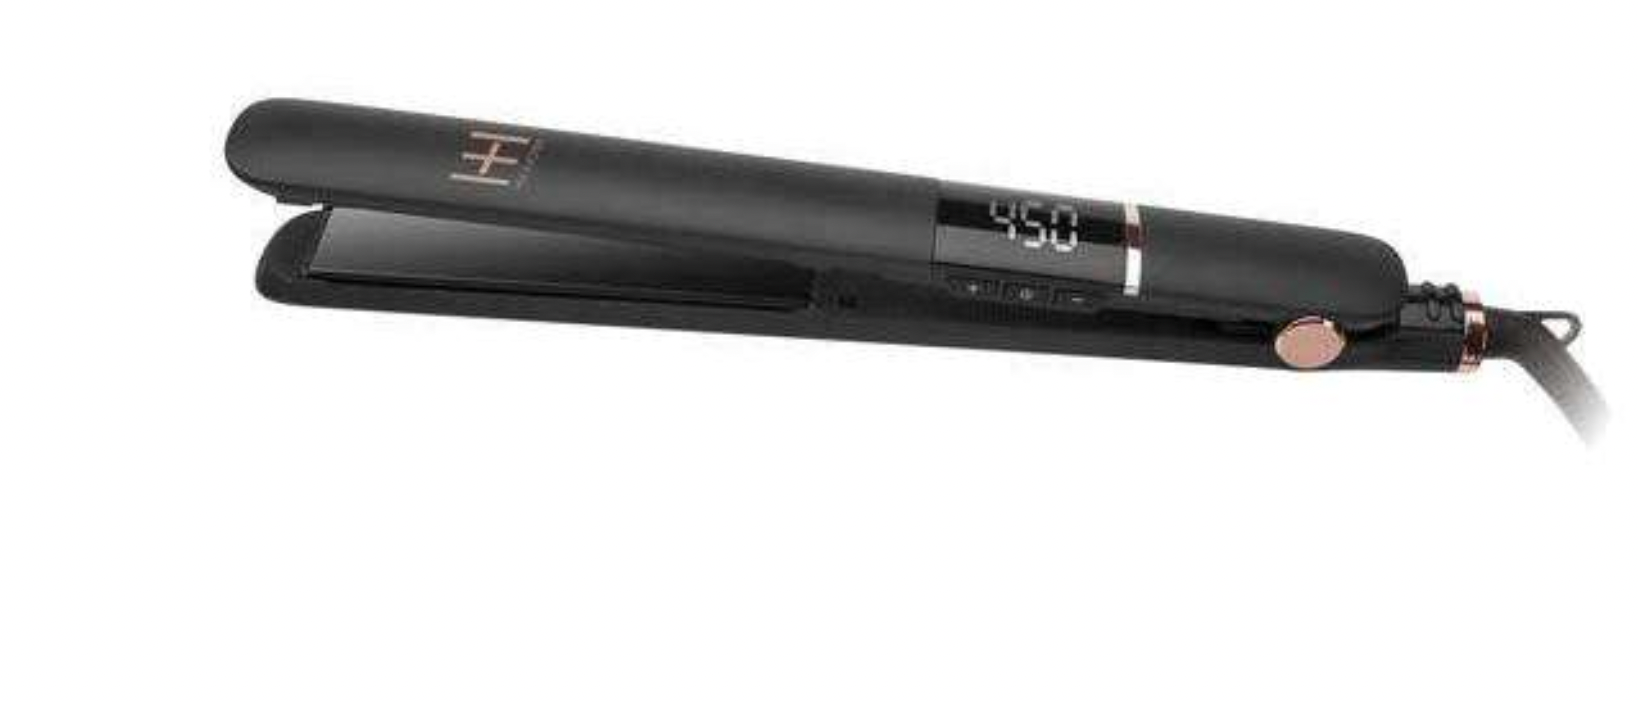 Annie Hot & Hotter Digital Flat Iron #5897 - BPolished Beauty Supply